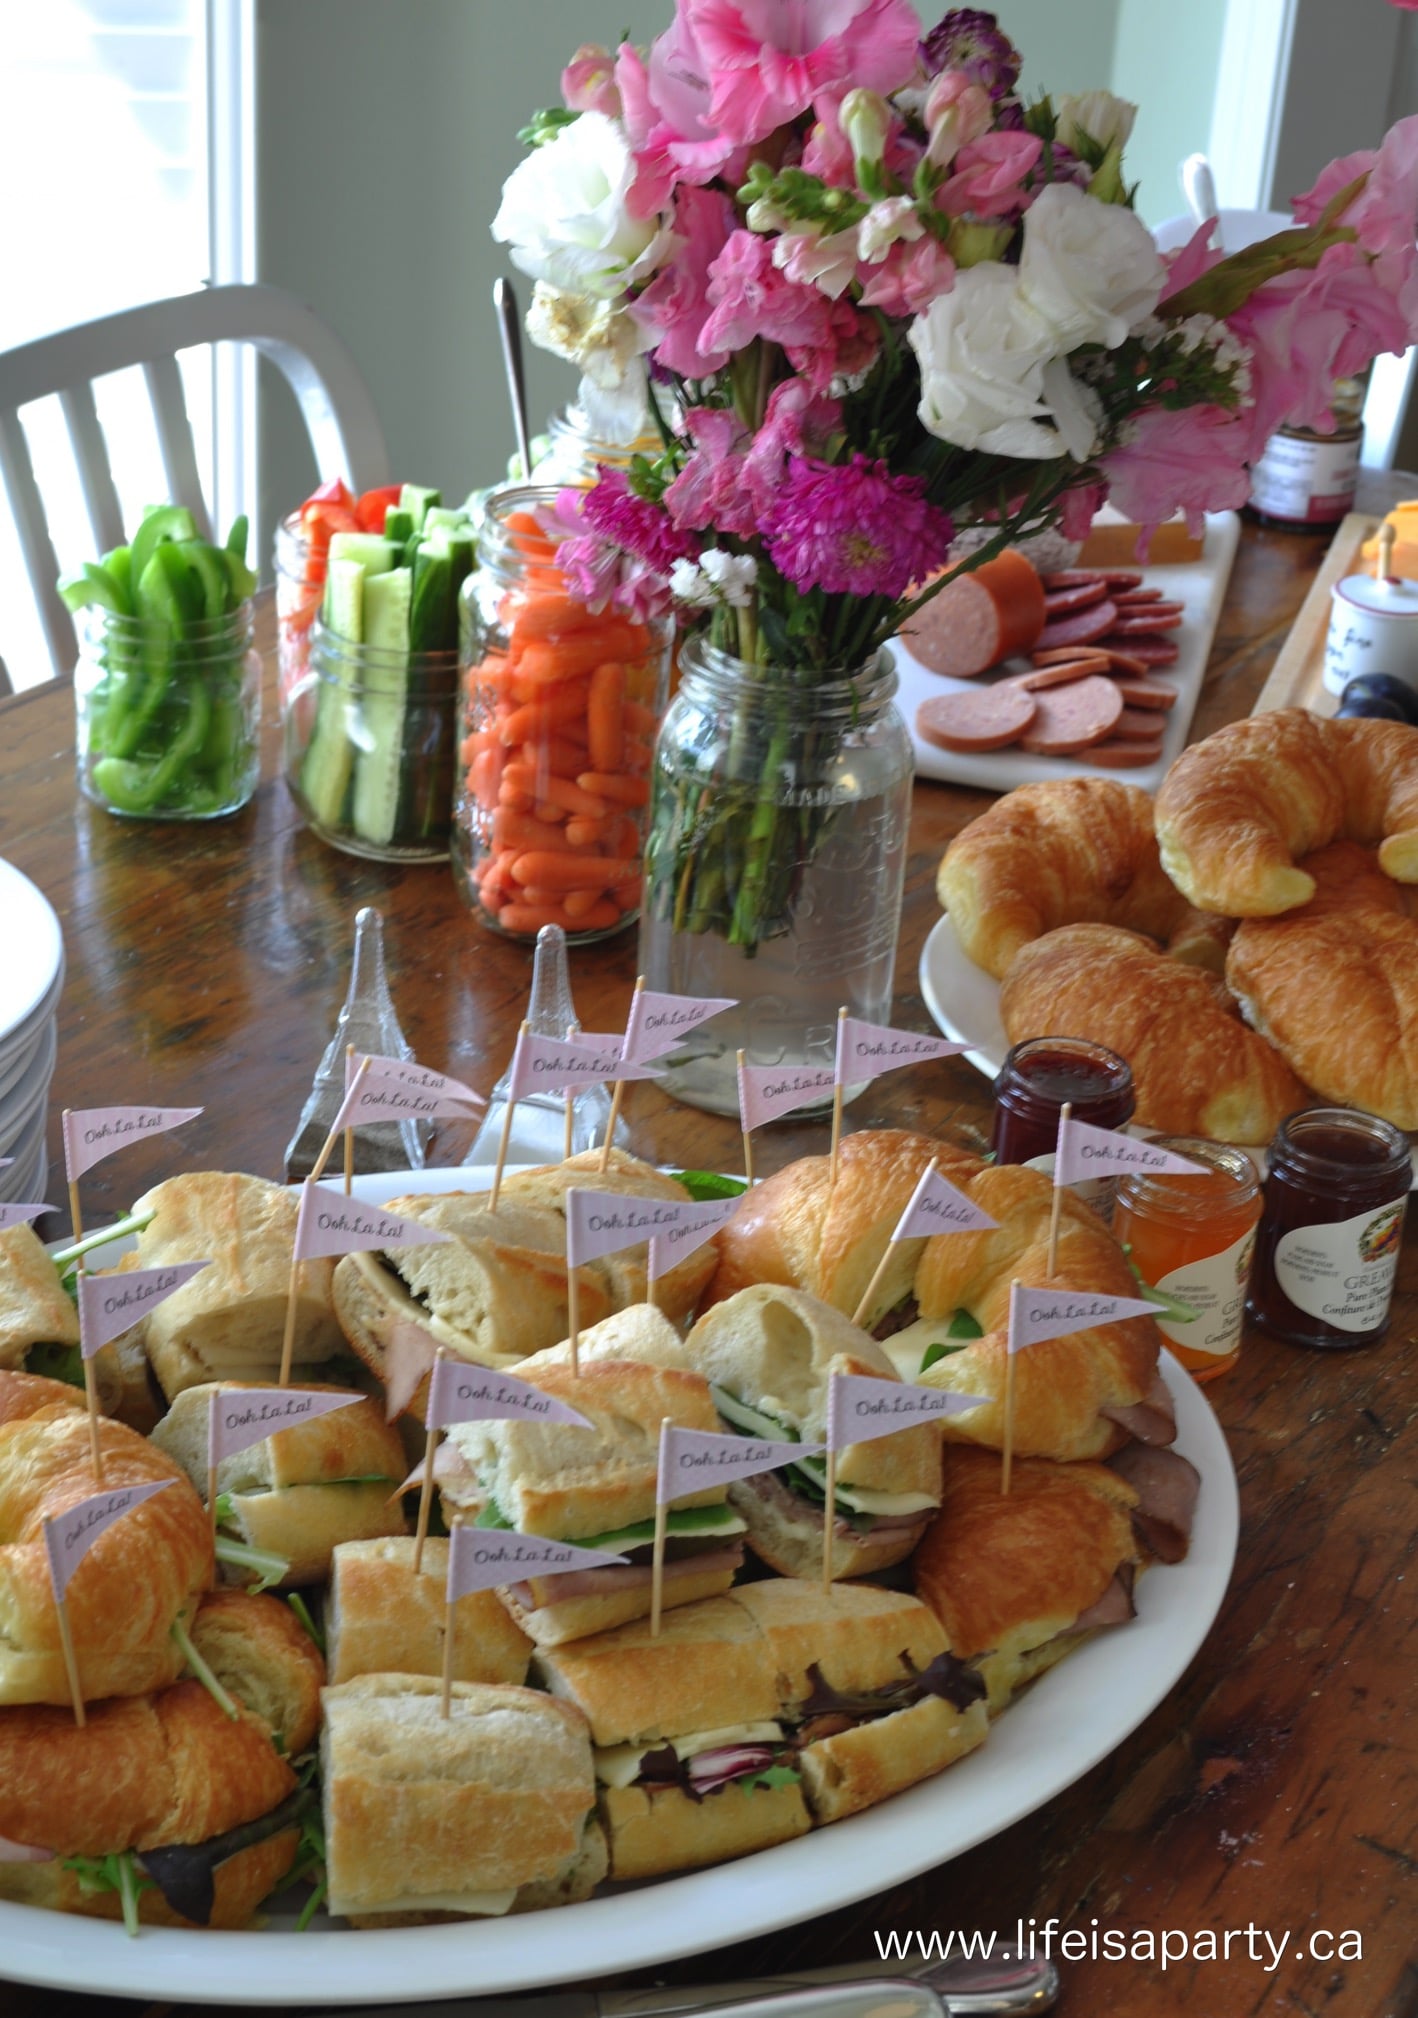 Paris Party Food -A French Themed Menu Great ideas of what to serve at your Paris themed party, from baguettes to macarons! Beautiful and delicious!